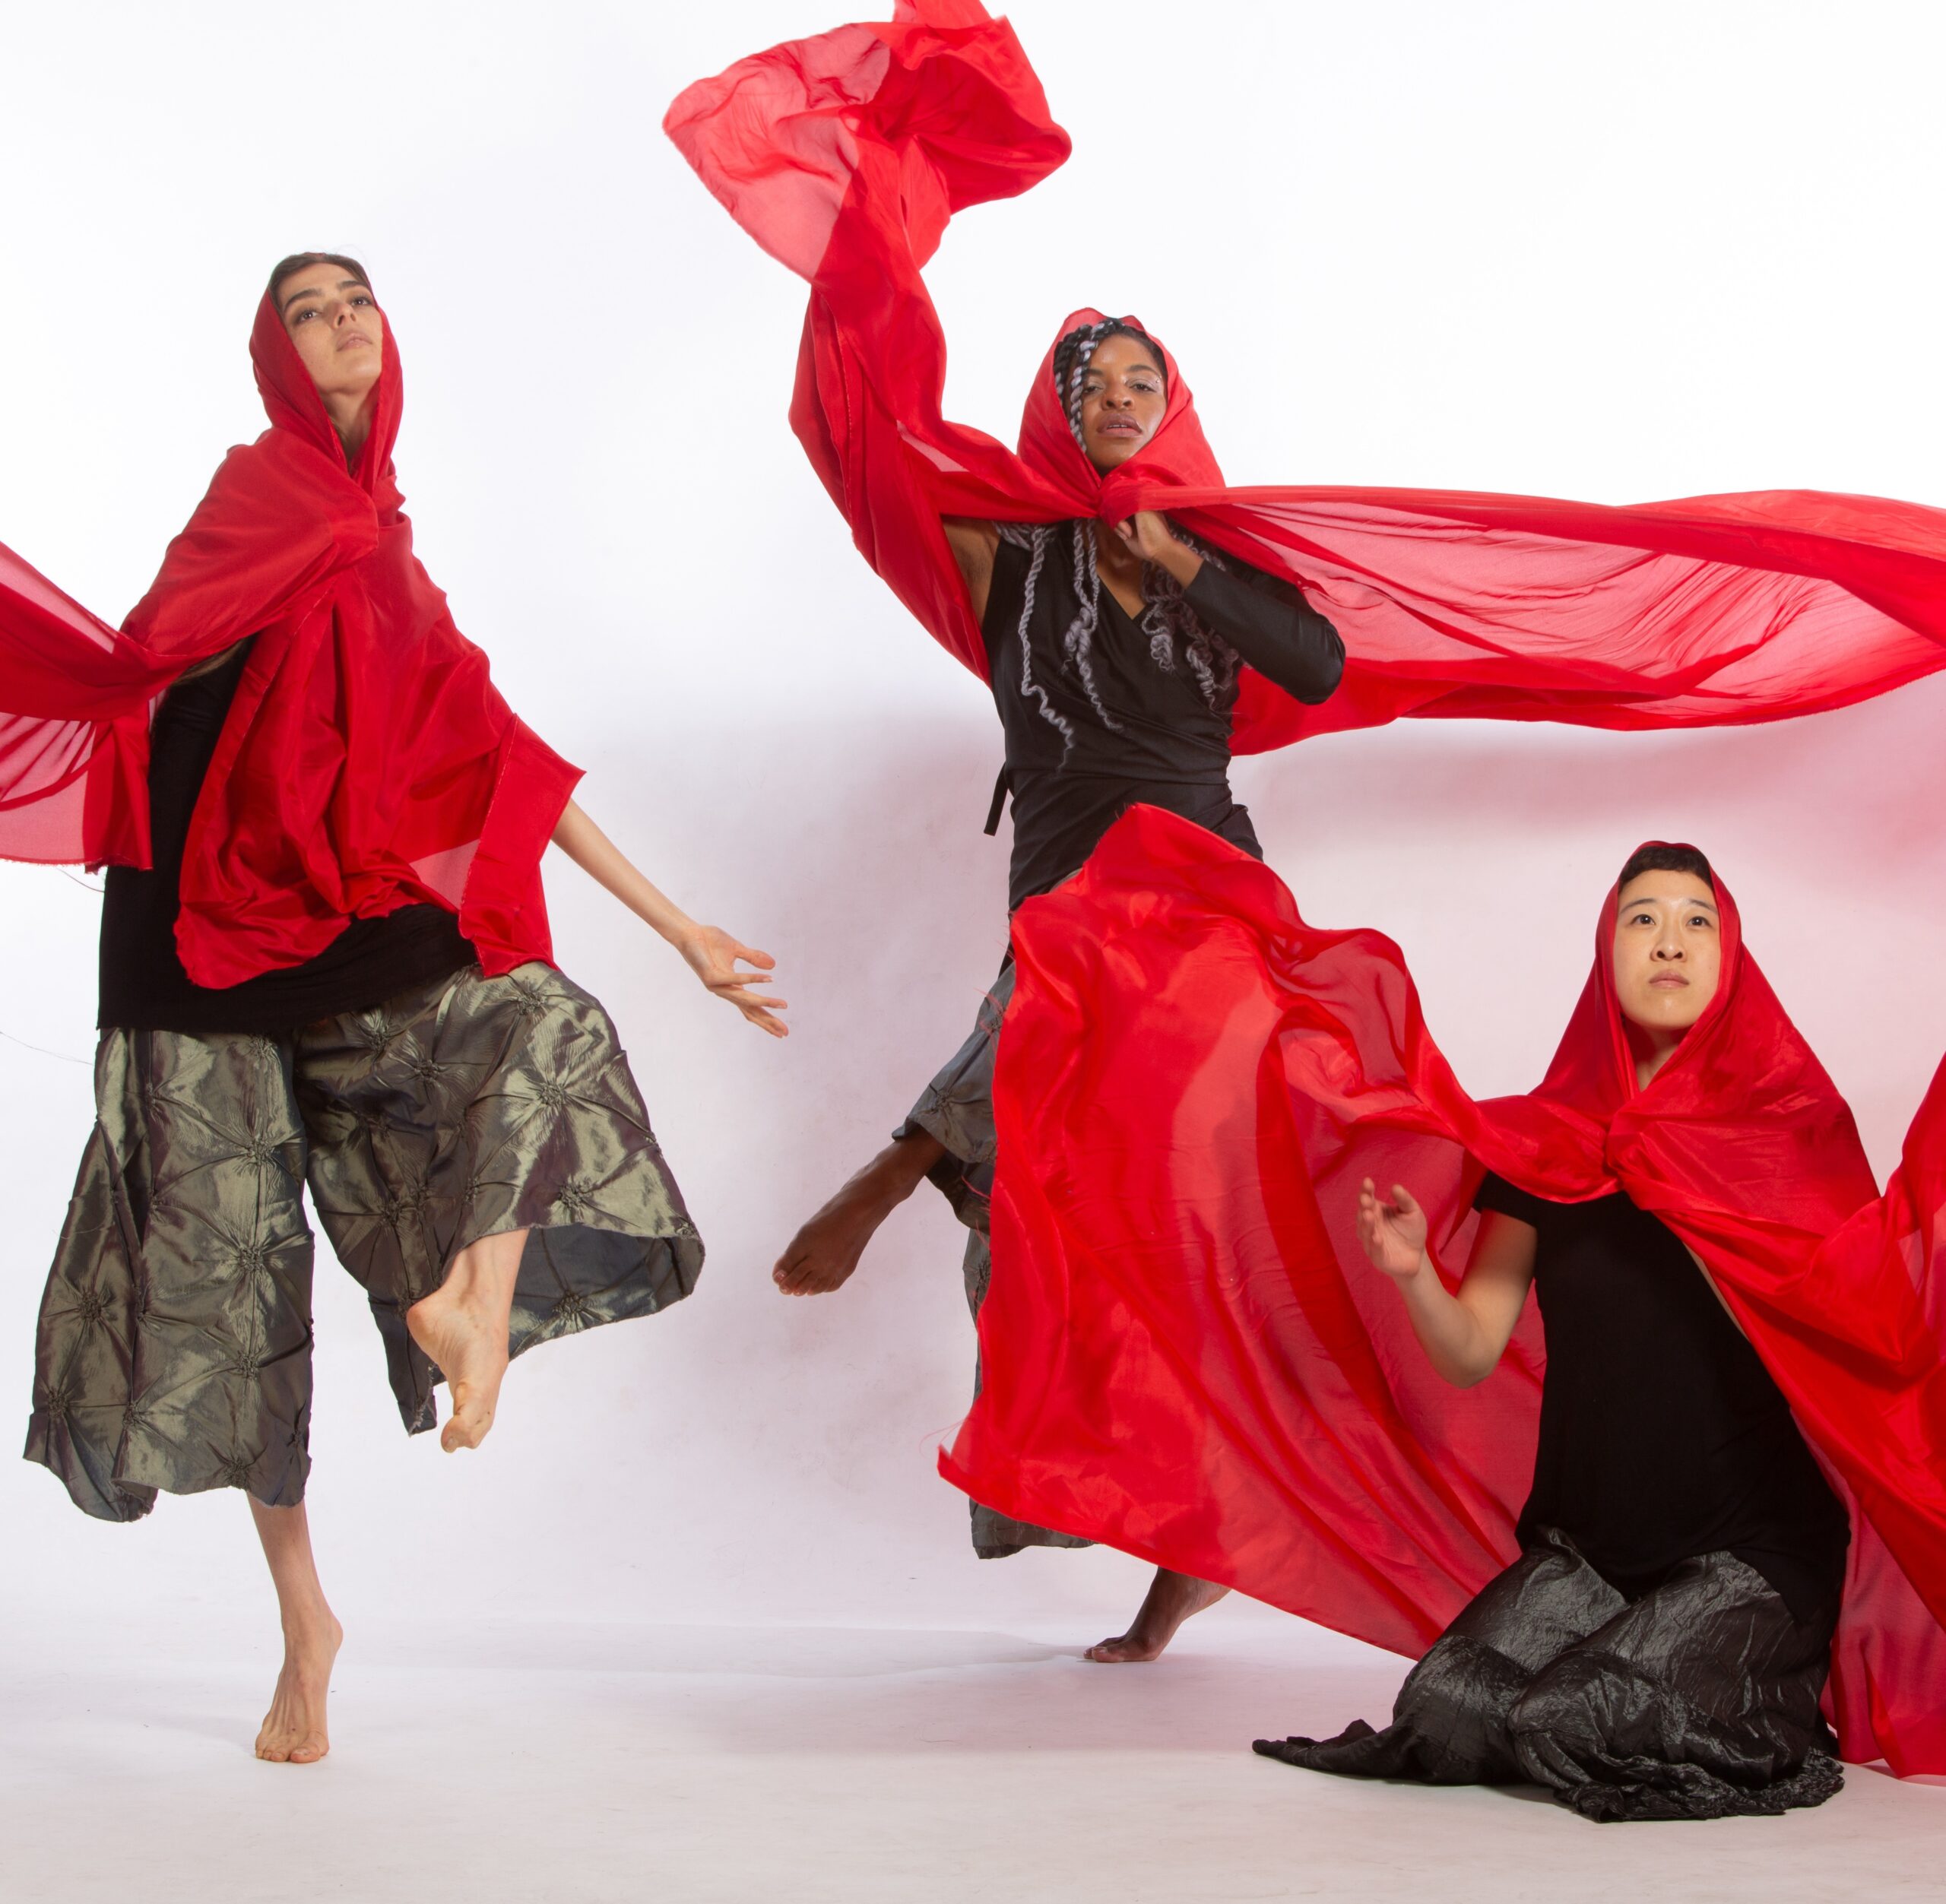 This is a photo of 3 dancers, each wearing flowy shiny dark gray/green pants and black tops. Large pieces of sheer red fabric are draped around their shoulders and heads, and floating in the air around them. The dancer on the left is up on one leg looking longingly upwards with an arm stretch downward. In the center is another dancer on one leg, staring into the camera. On the far right is a third dancer, kneeling and looking upwards with an arm outstretched.